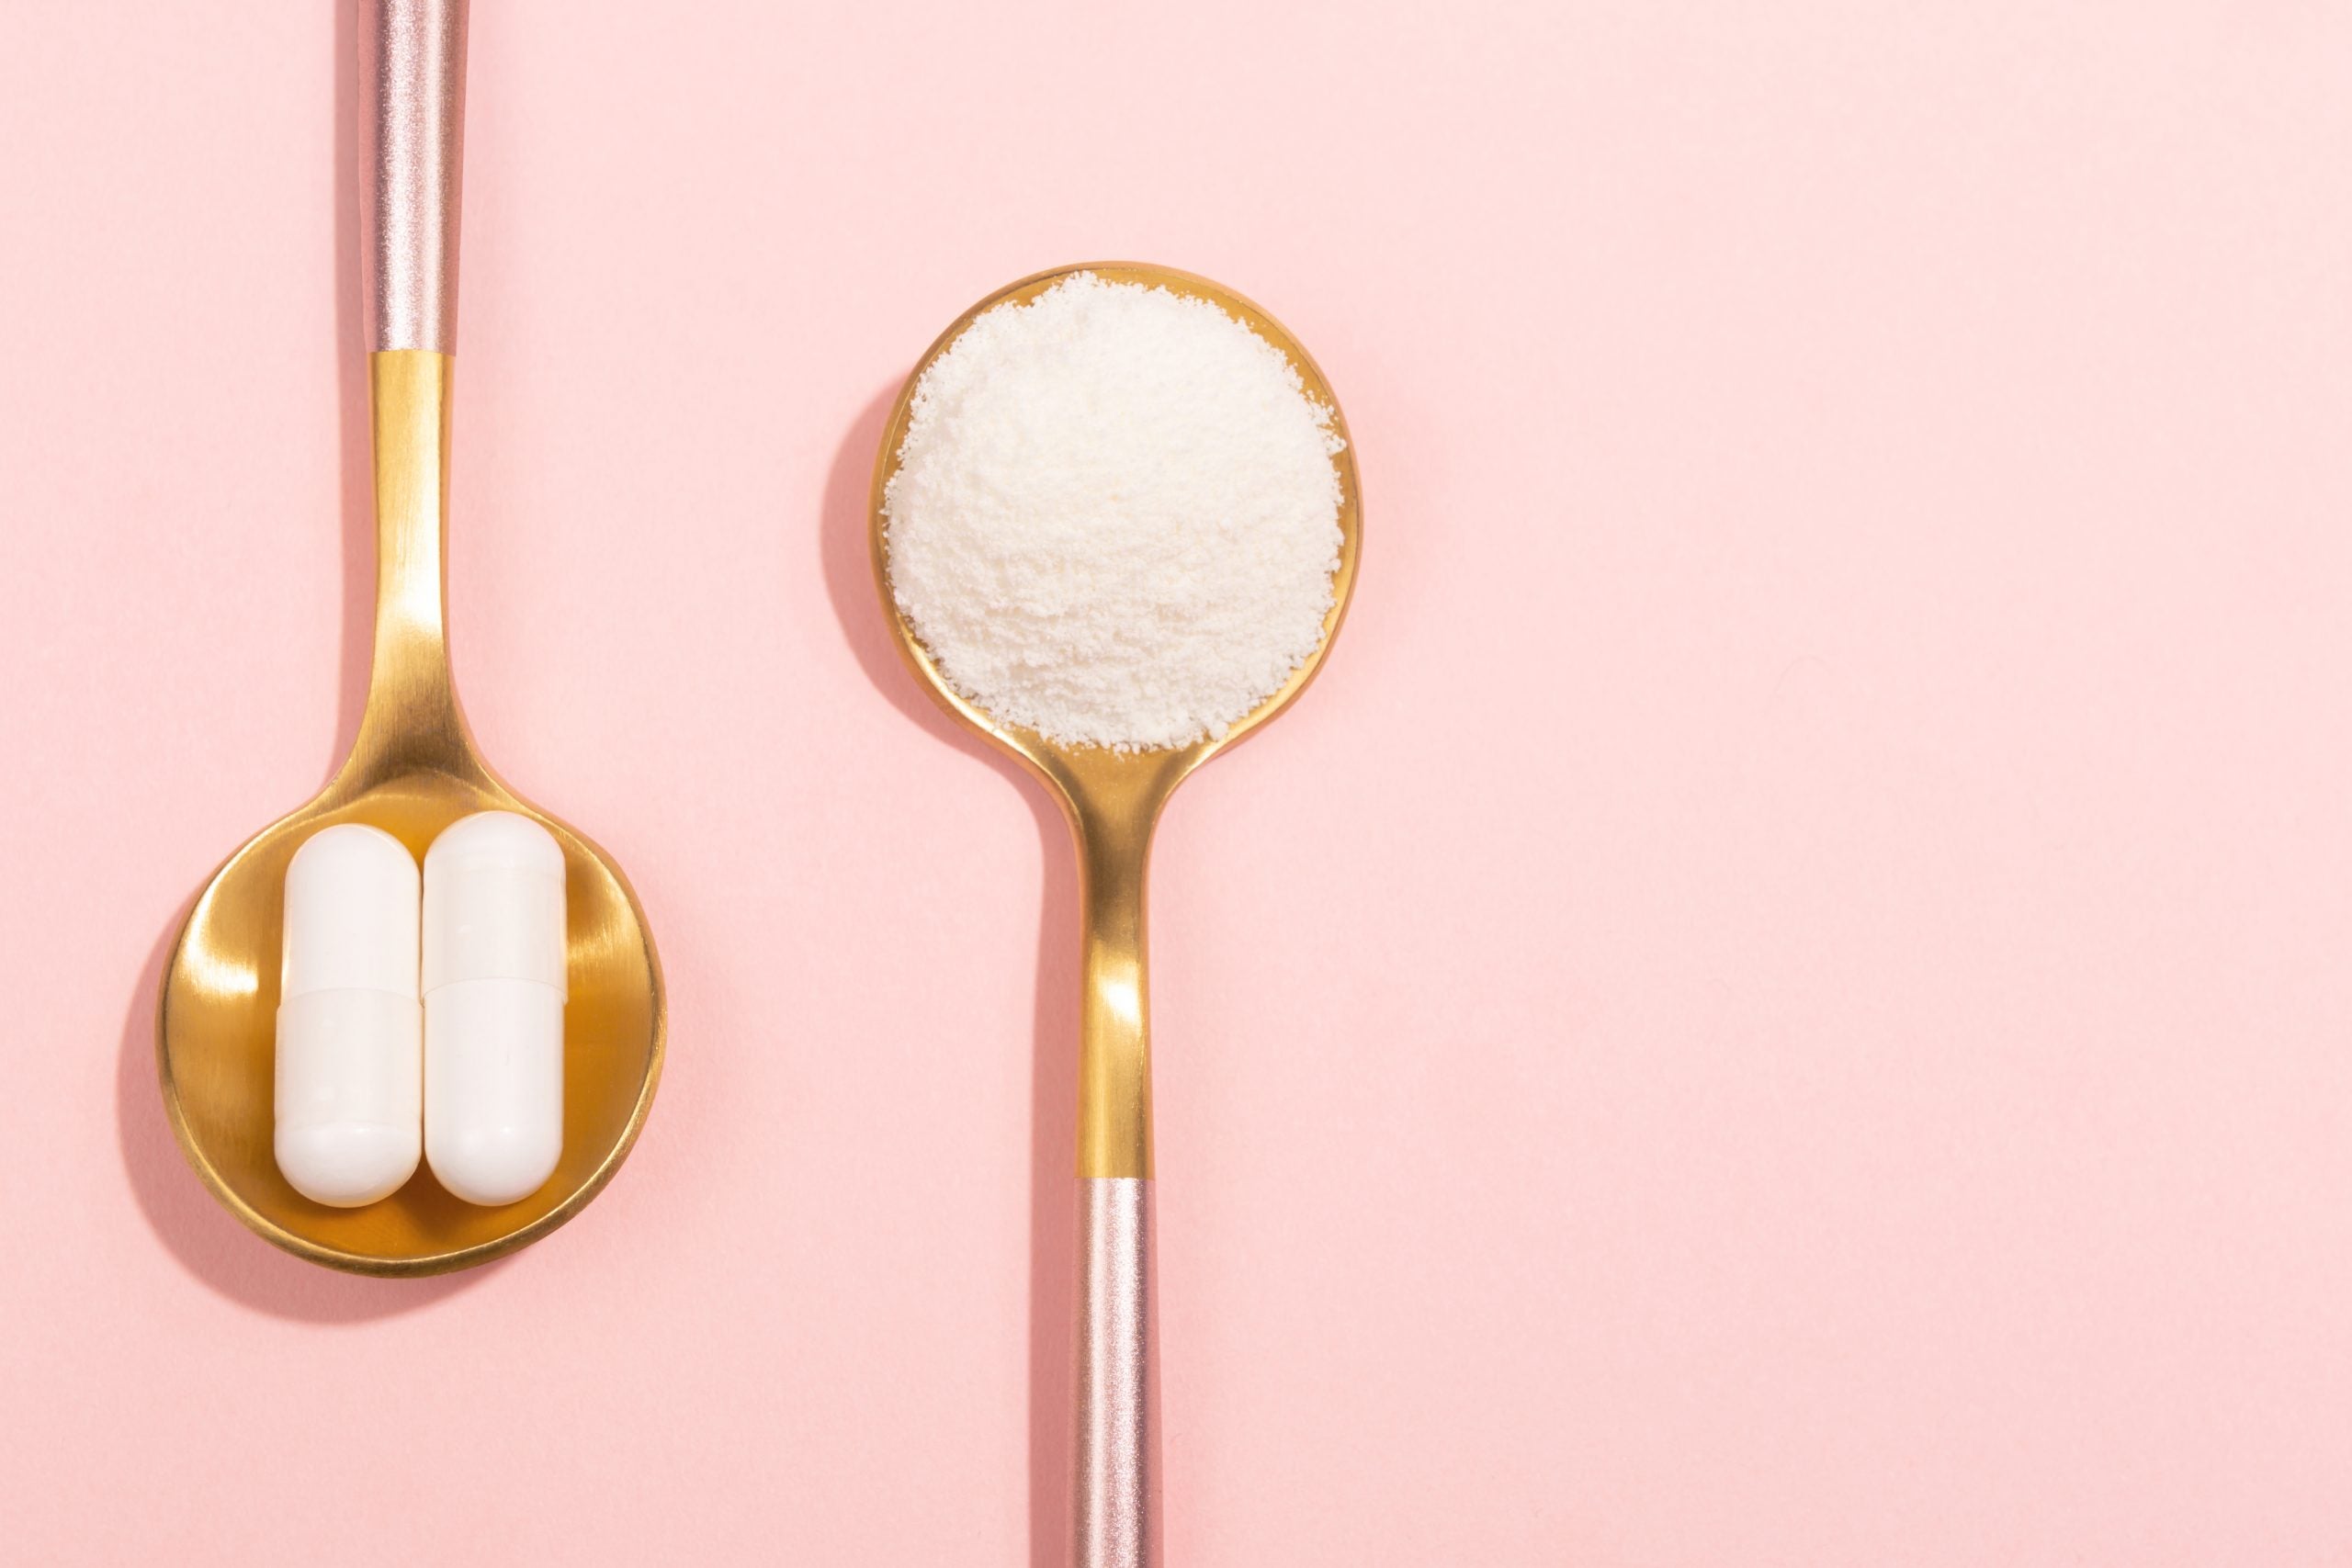 two spoons, one with collagen powder and one with collagen supplements, set on a pink background